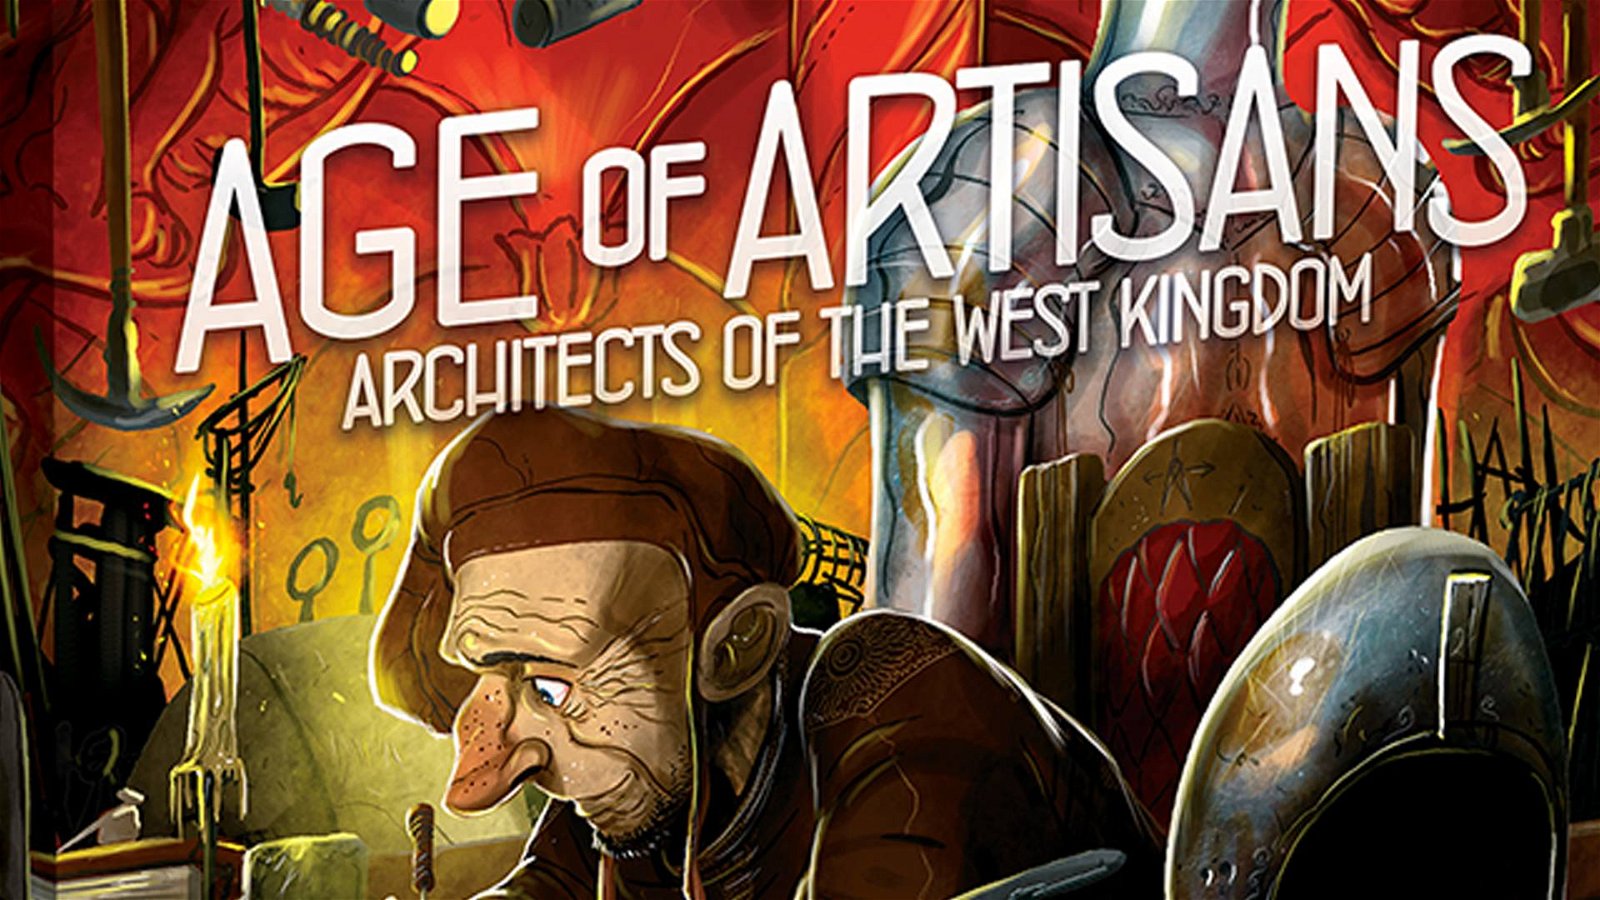 Immagine di Architects of the West Kingdom: Age of Artisans in arrivo l'ultima espansione di The West Kingdom Trilogy